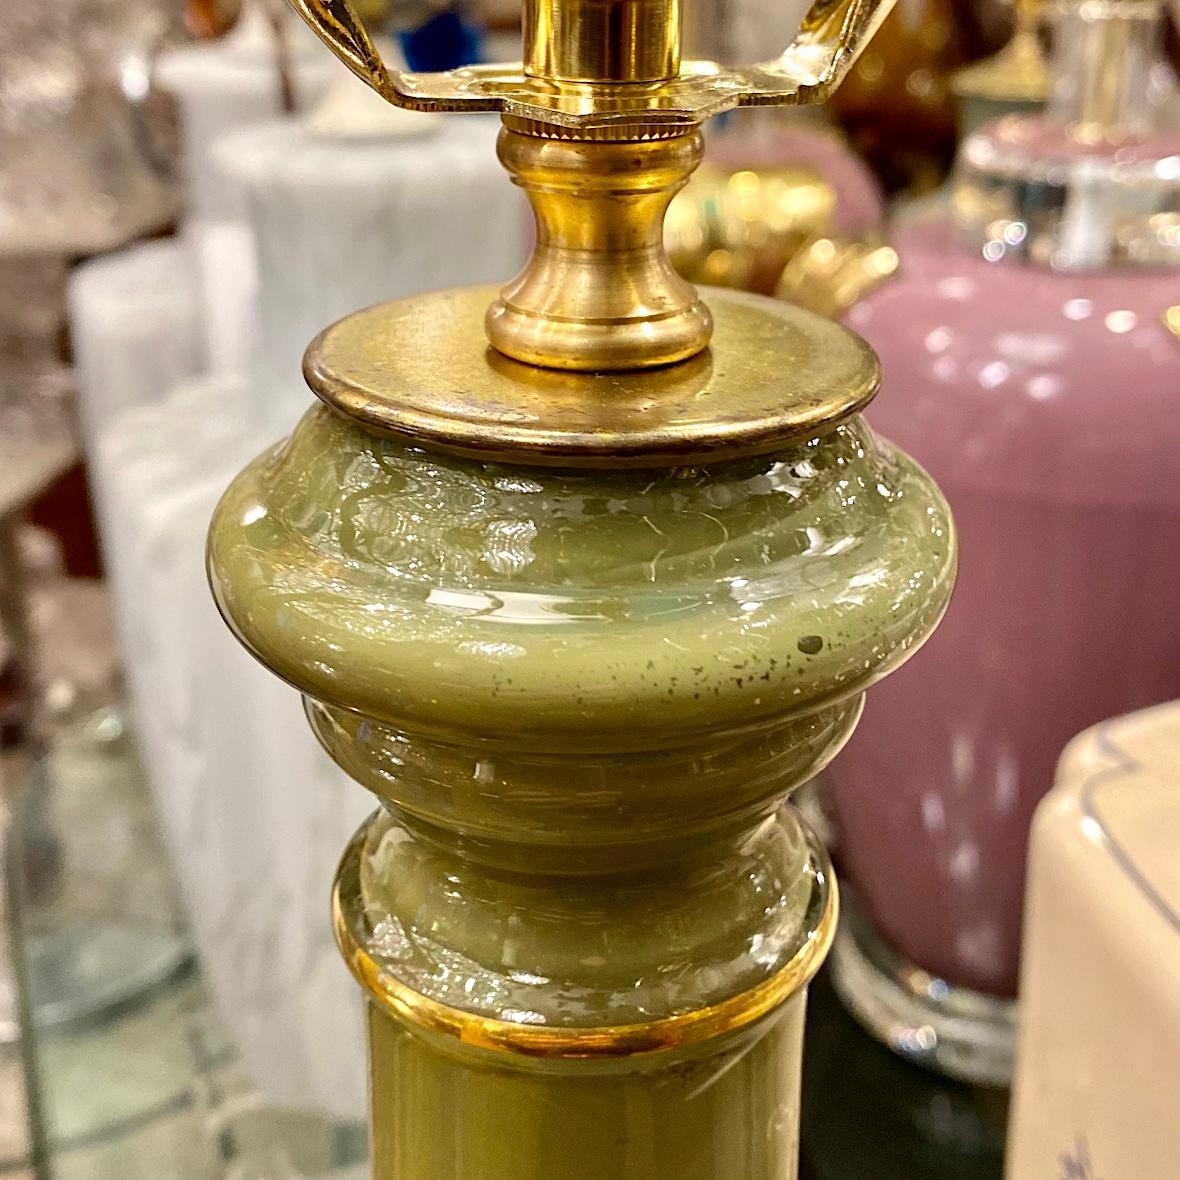 Pair of circa 1950's French glass lamps, green body with gilt details.

Measurements:
Height: 19.5
Height to shade rest: 30